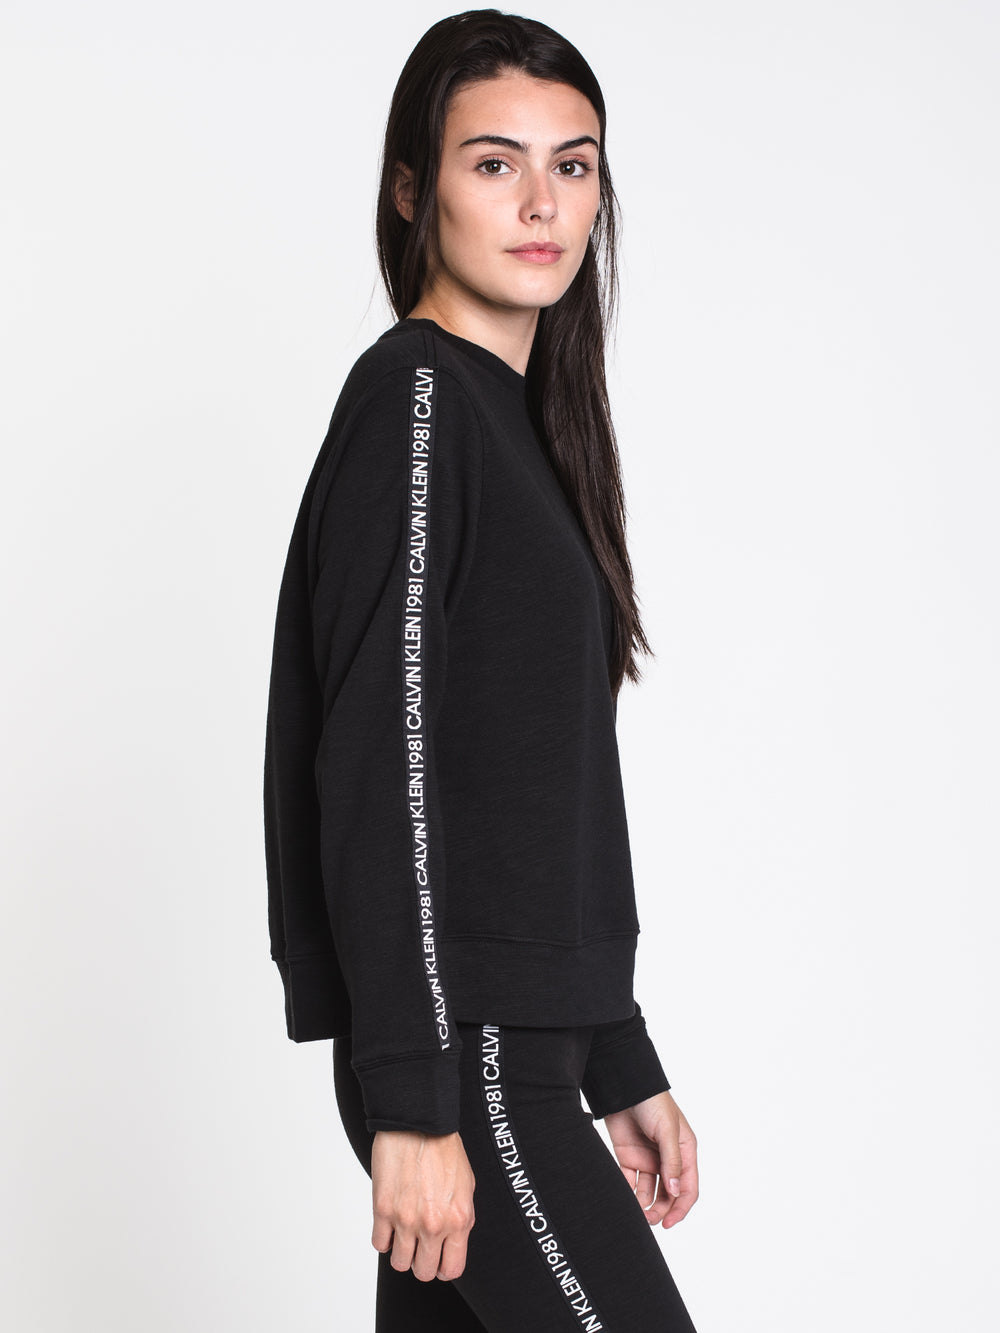 WOMENS 1981 BOLD TAPED CREW - BLACK - CLEARANCE